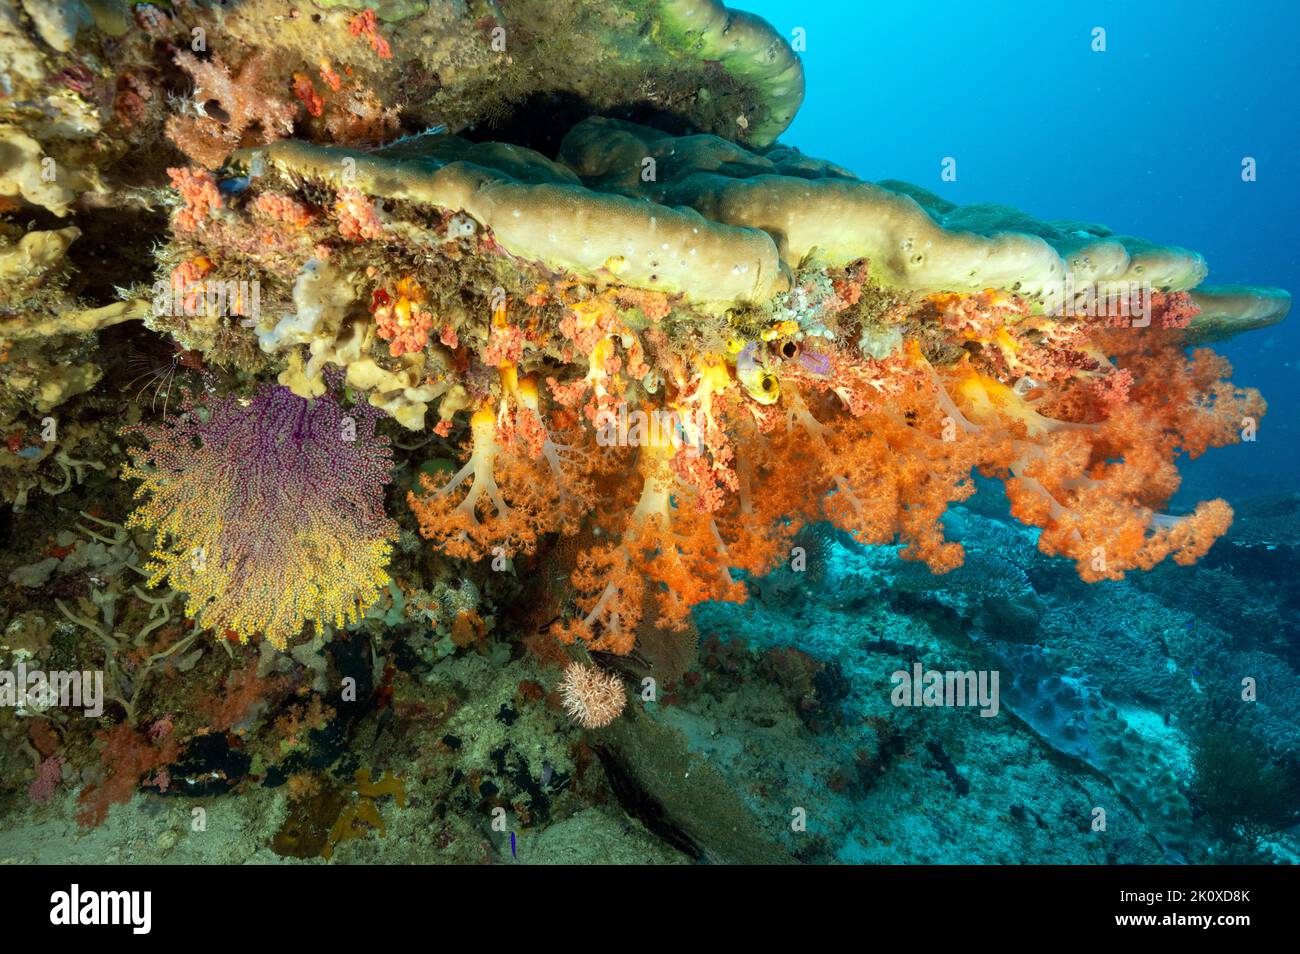 Overhang with Siphonogorgia sp., and Scleronephthya sp corals, Raja Ampat Indonesia Stock Photo